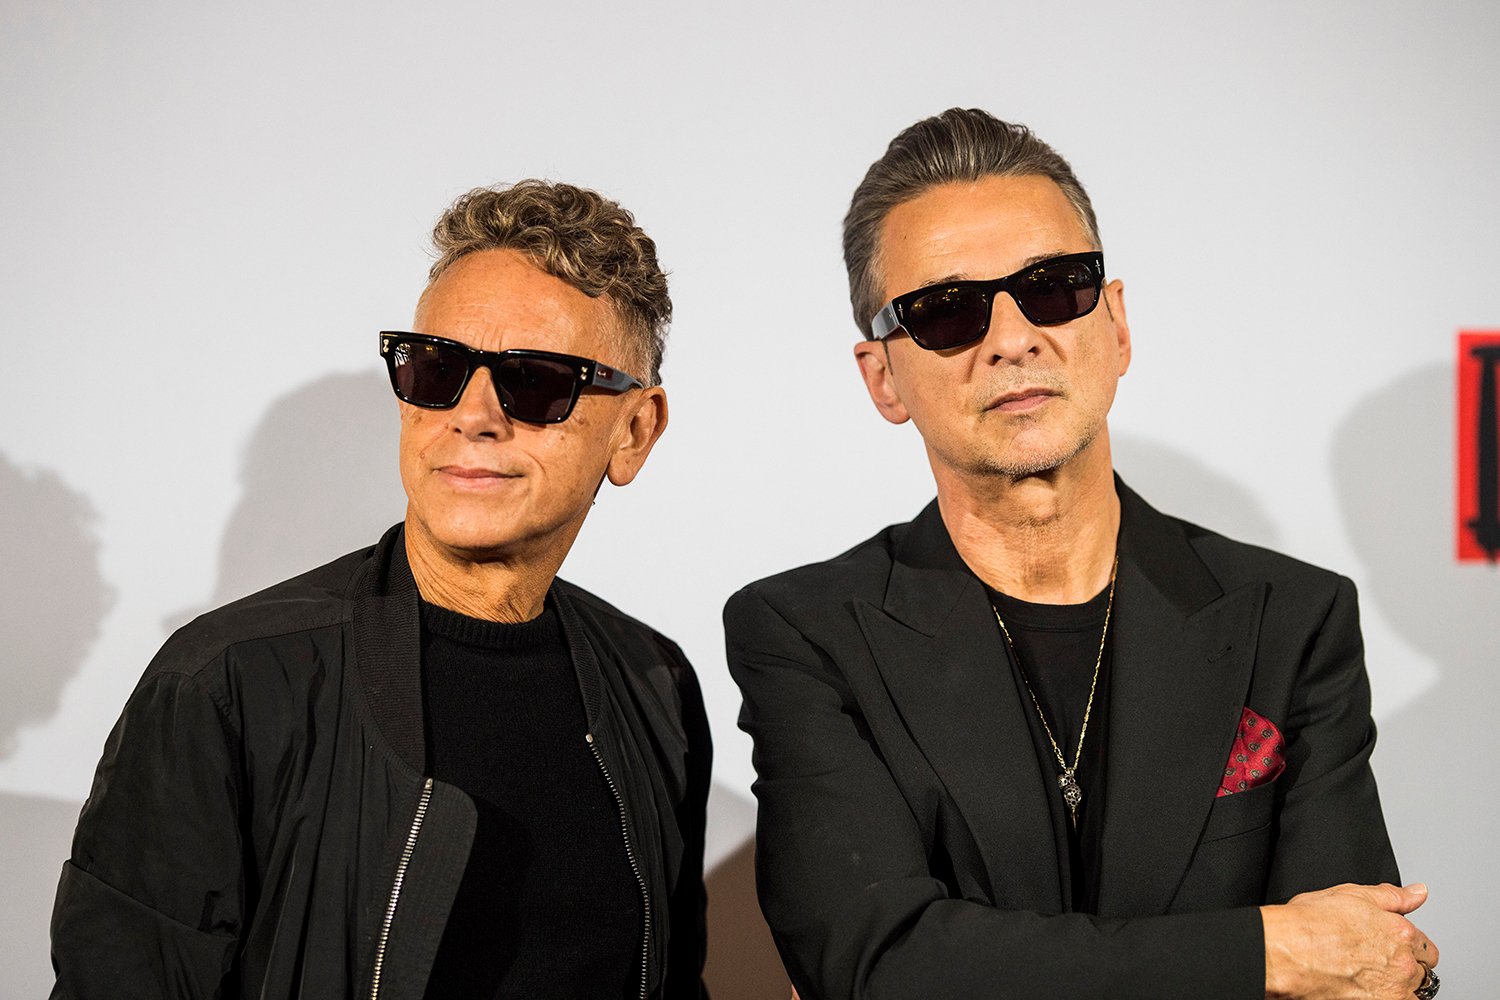 Martin Gore and Dave Gahan of Depeche Mode pose for a photo at a press conference in Berlin